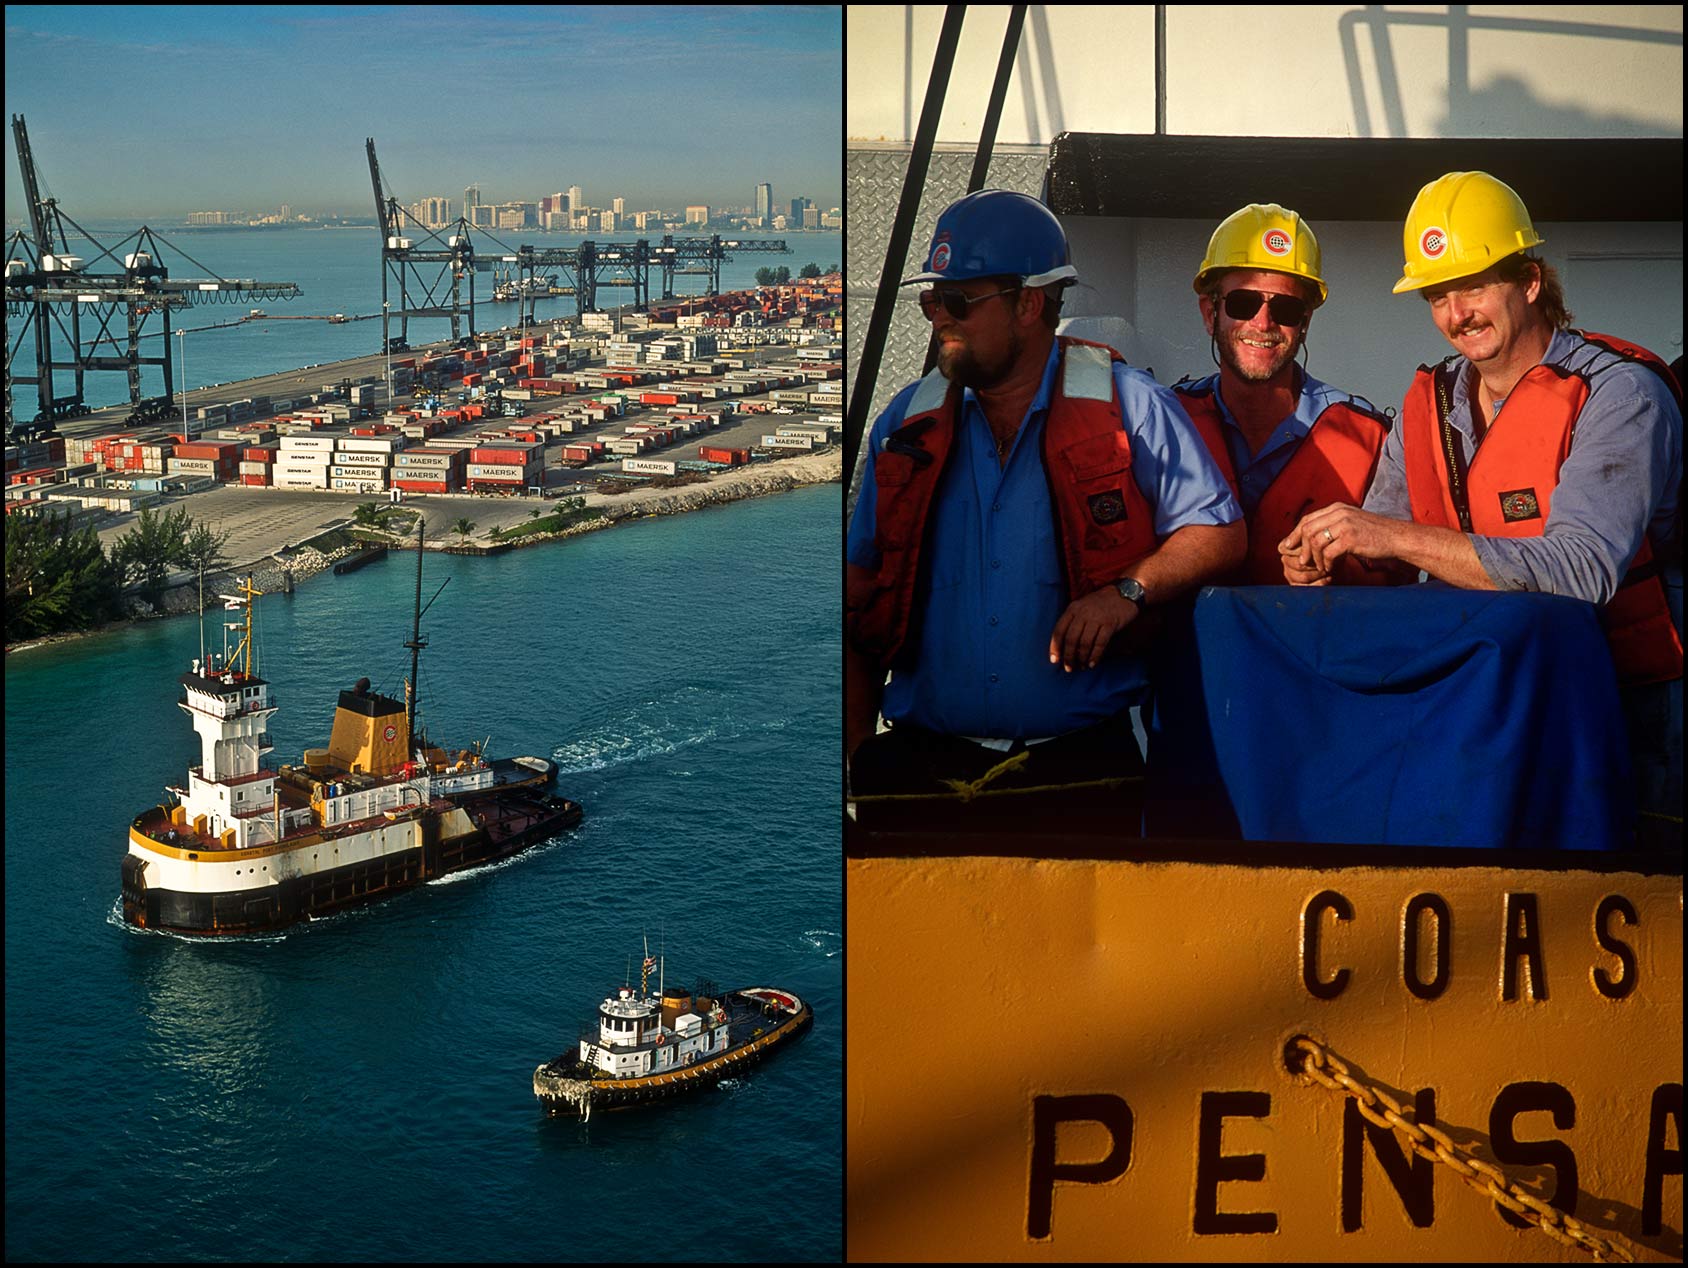 Aerial view of two tug boats in the Port of Miami with cranes and skyline in background (L), Group of tub boat deck workers in life vests and hard hats (R).